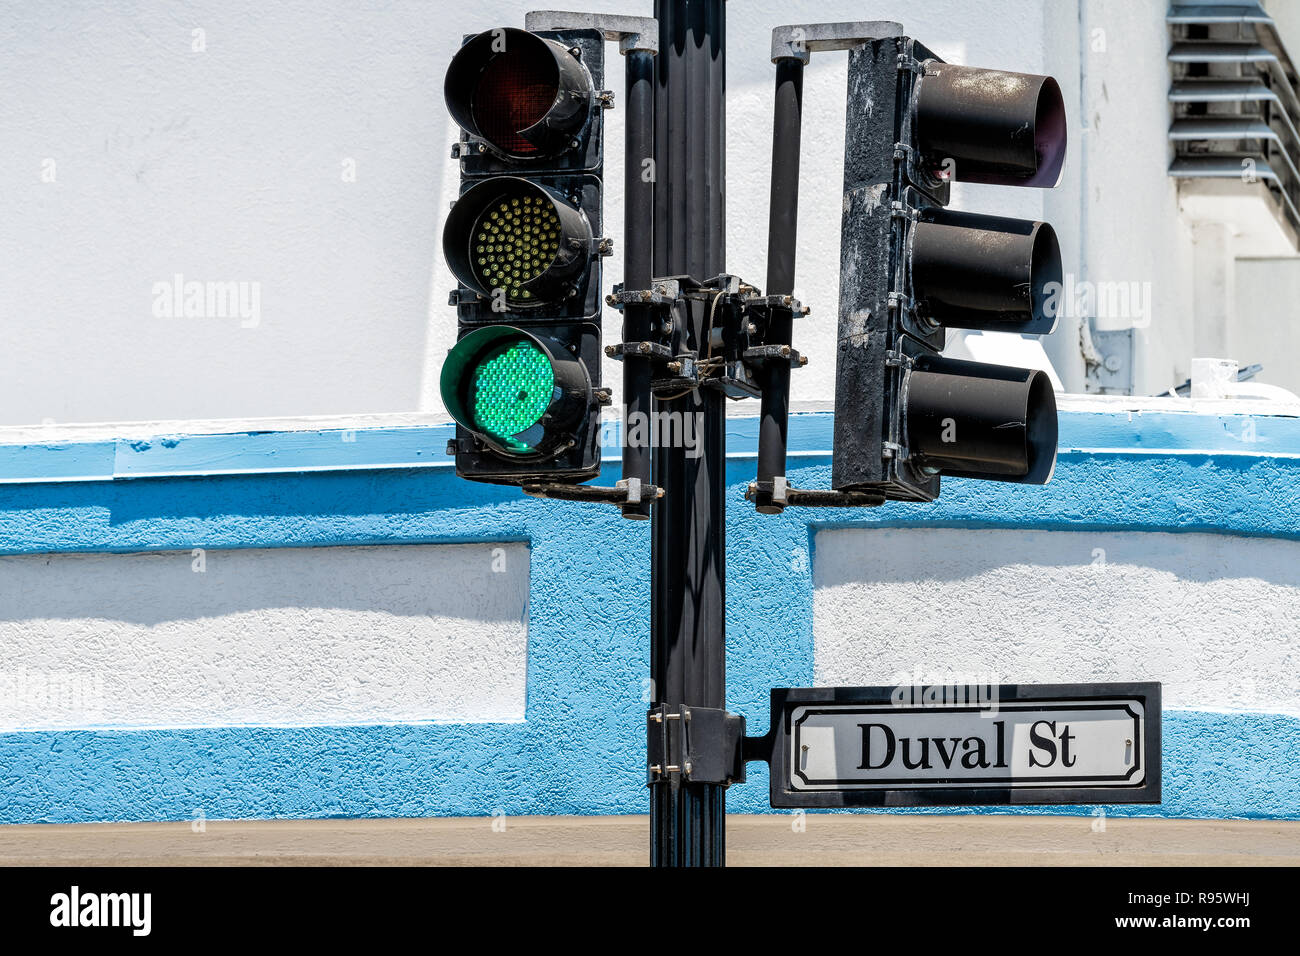 Closeup of Duval St street road traffic sign in old town of Key West, Florida, Fl in city, urban view with green light against blue, white building in Stock Photo